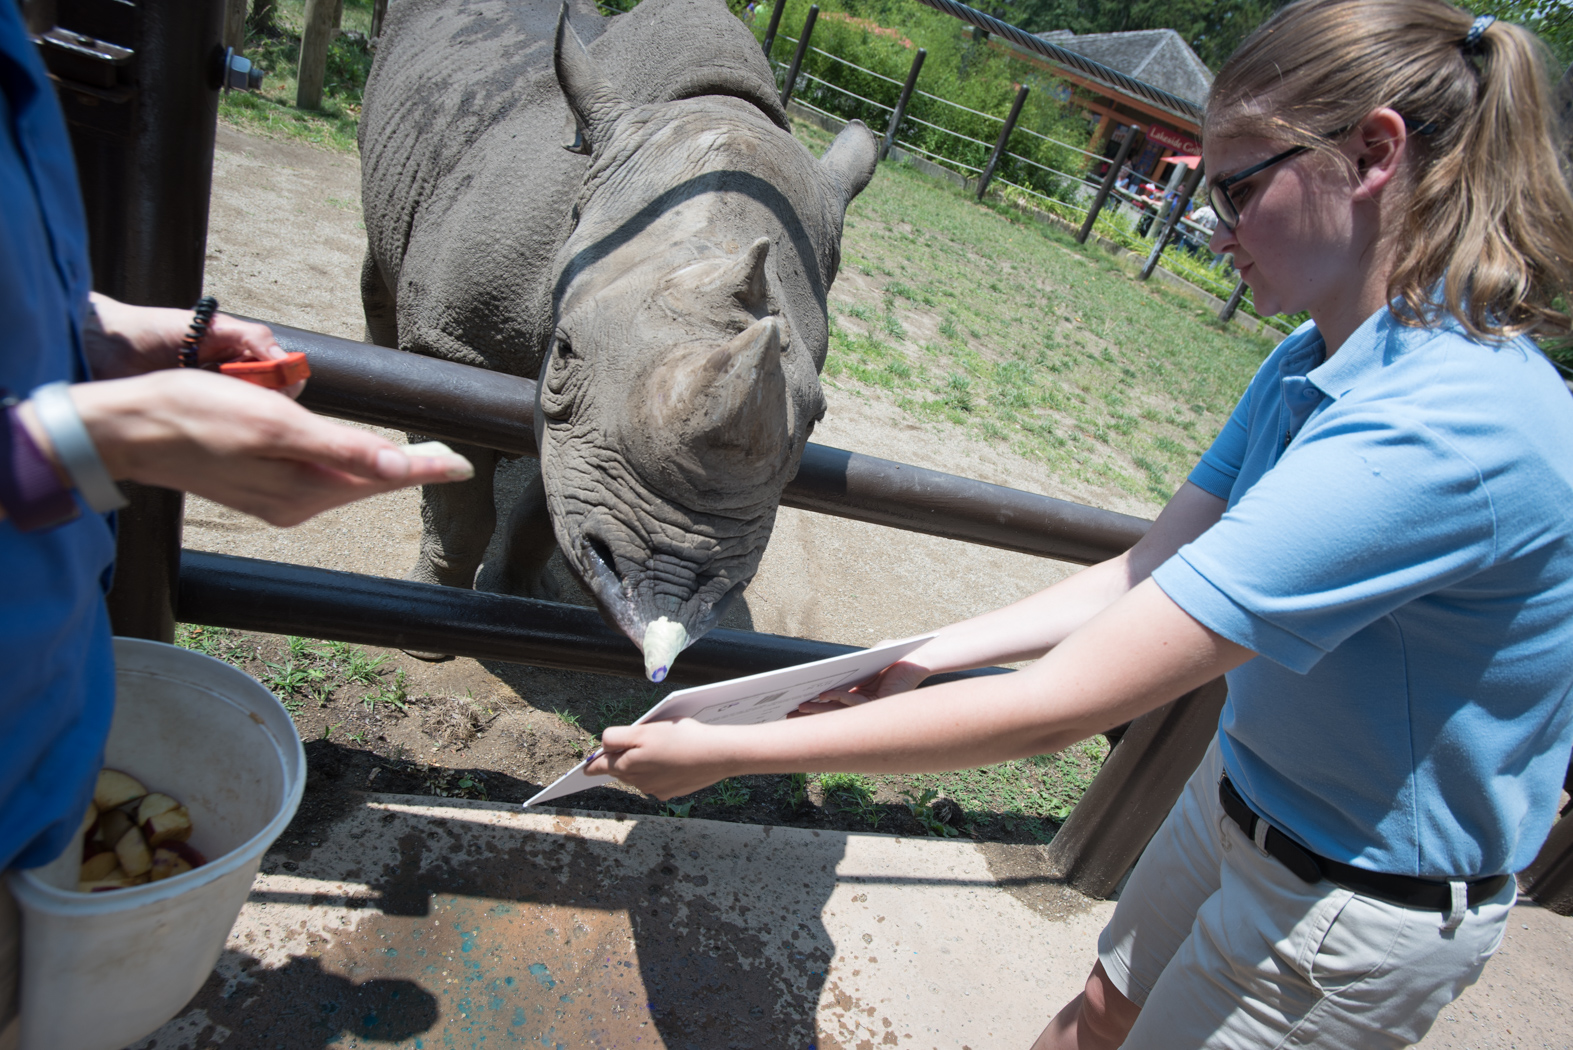 Rosie the Black rhino at Columbus Zoo paints with her lip to fundraise for rhino conservation